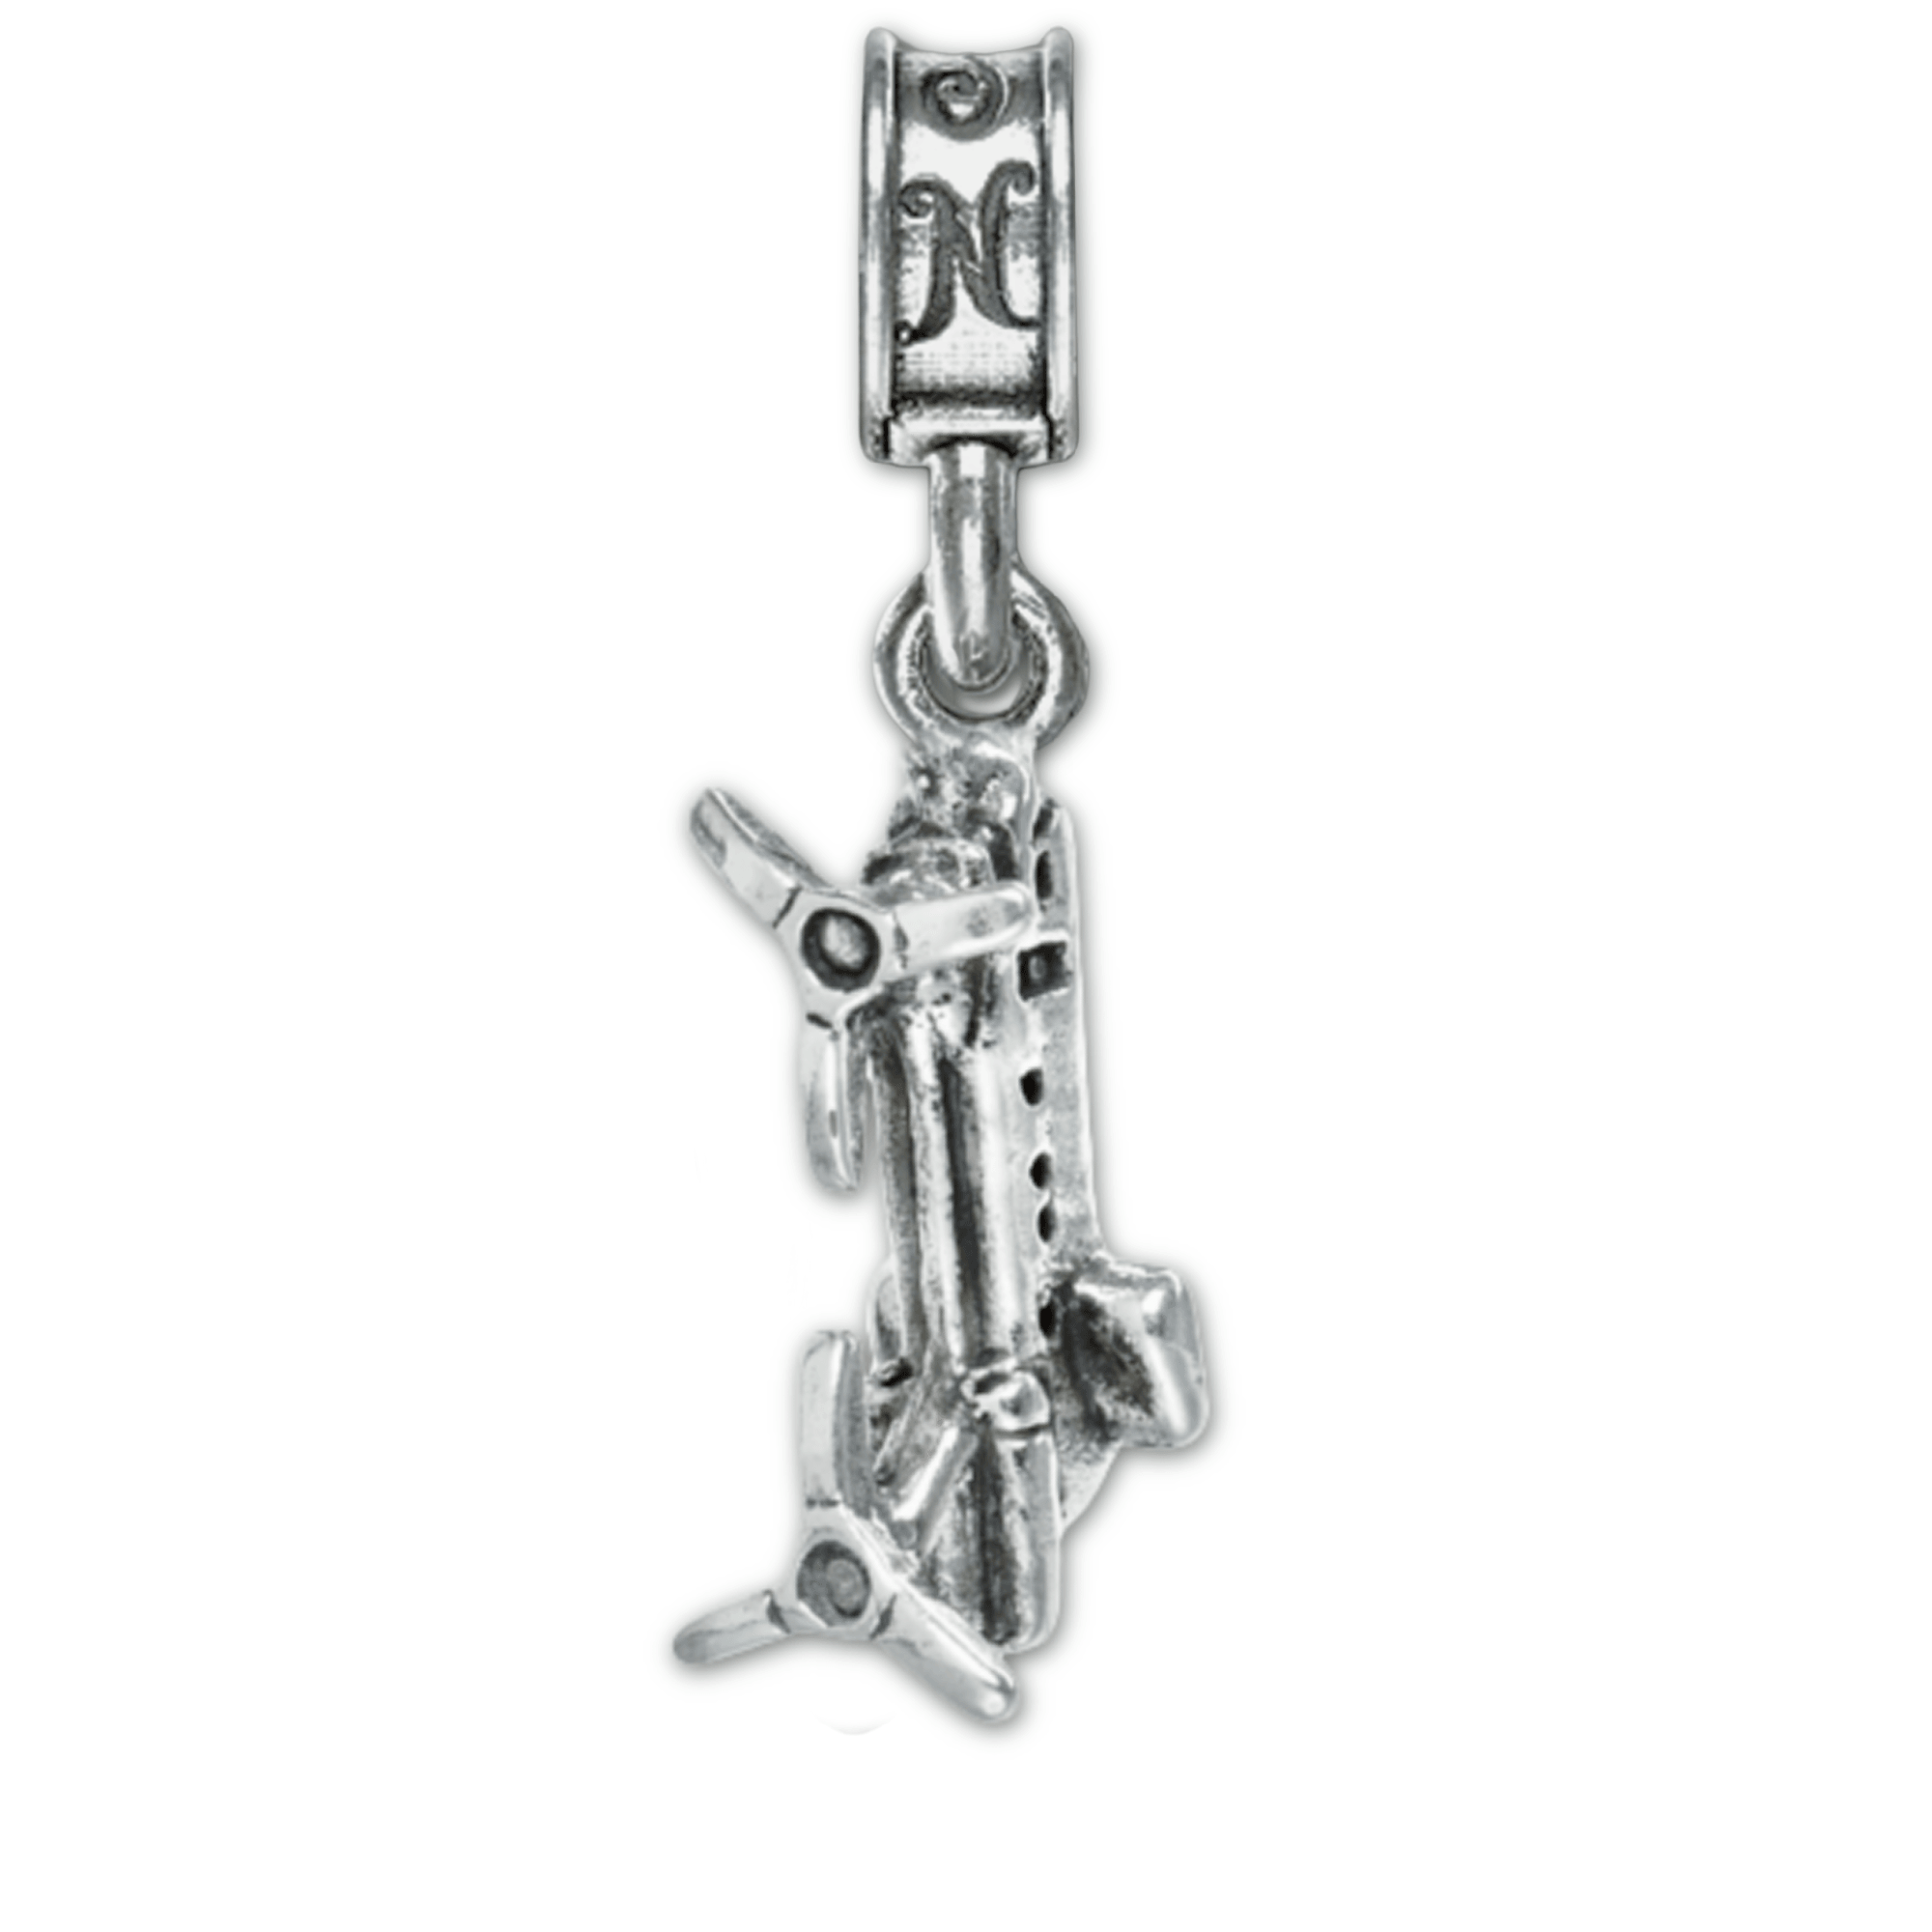 Military Jewelry, Military Charms, Military Gifts, Military Aviation, CH-46 Helicopter Charm